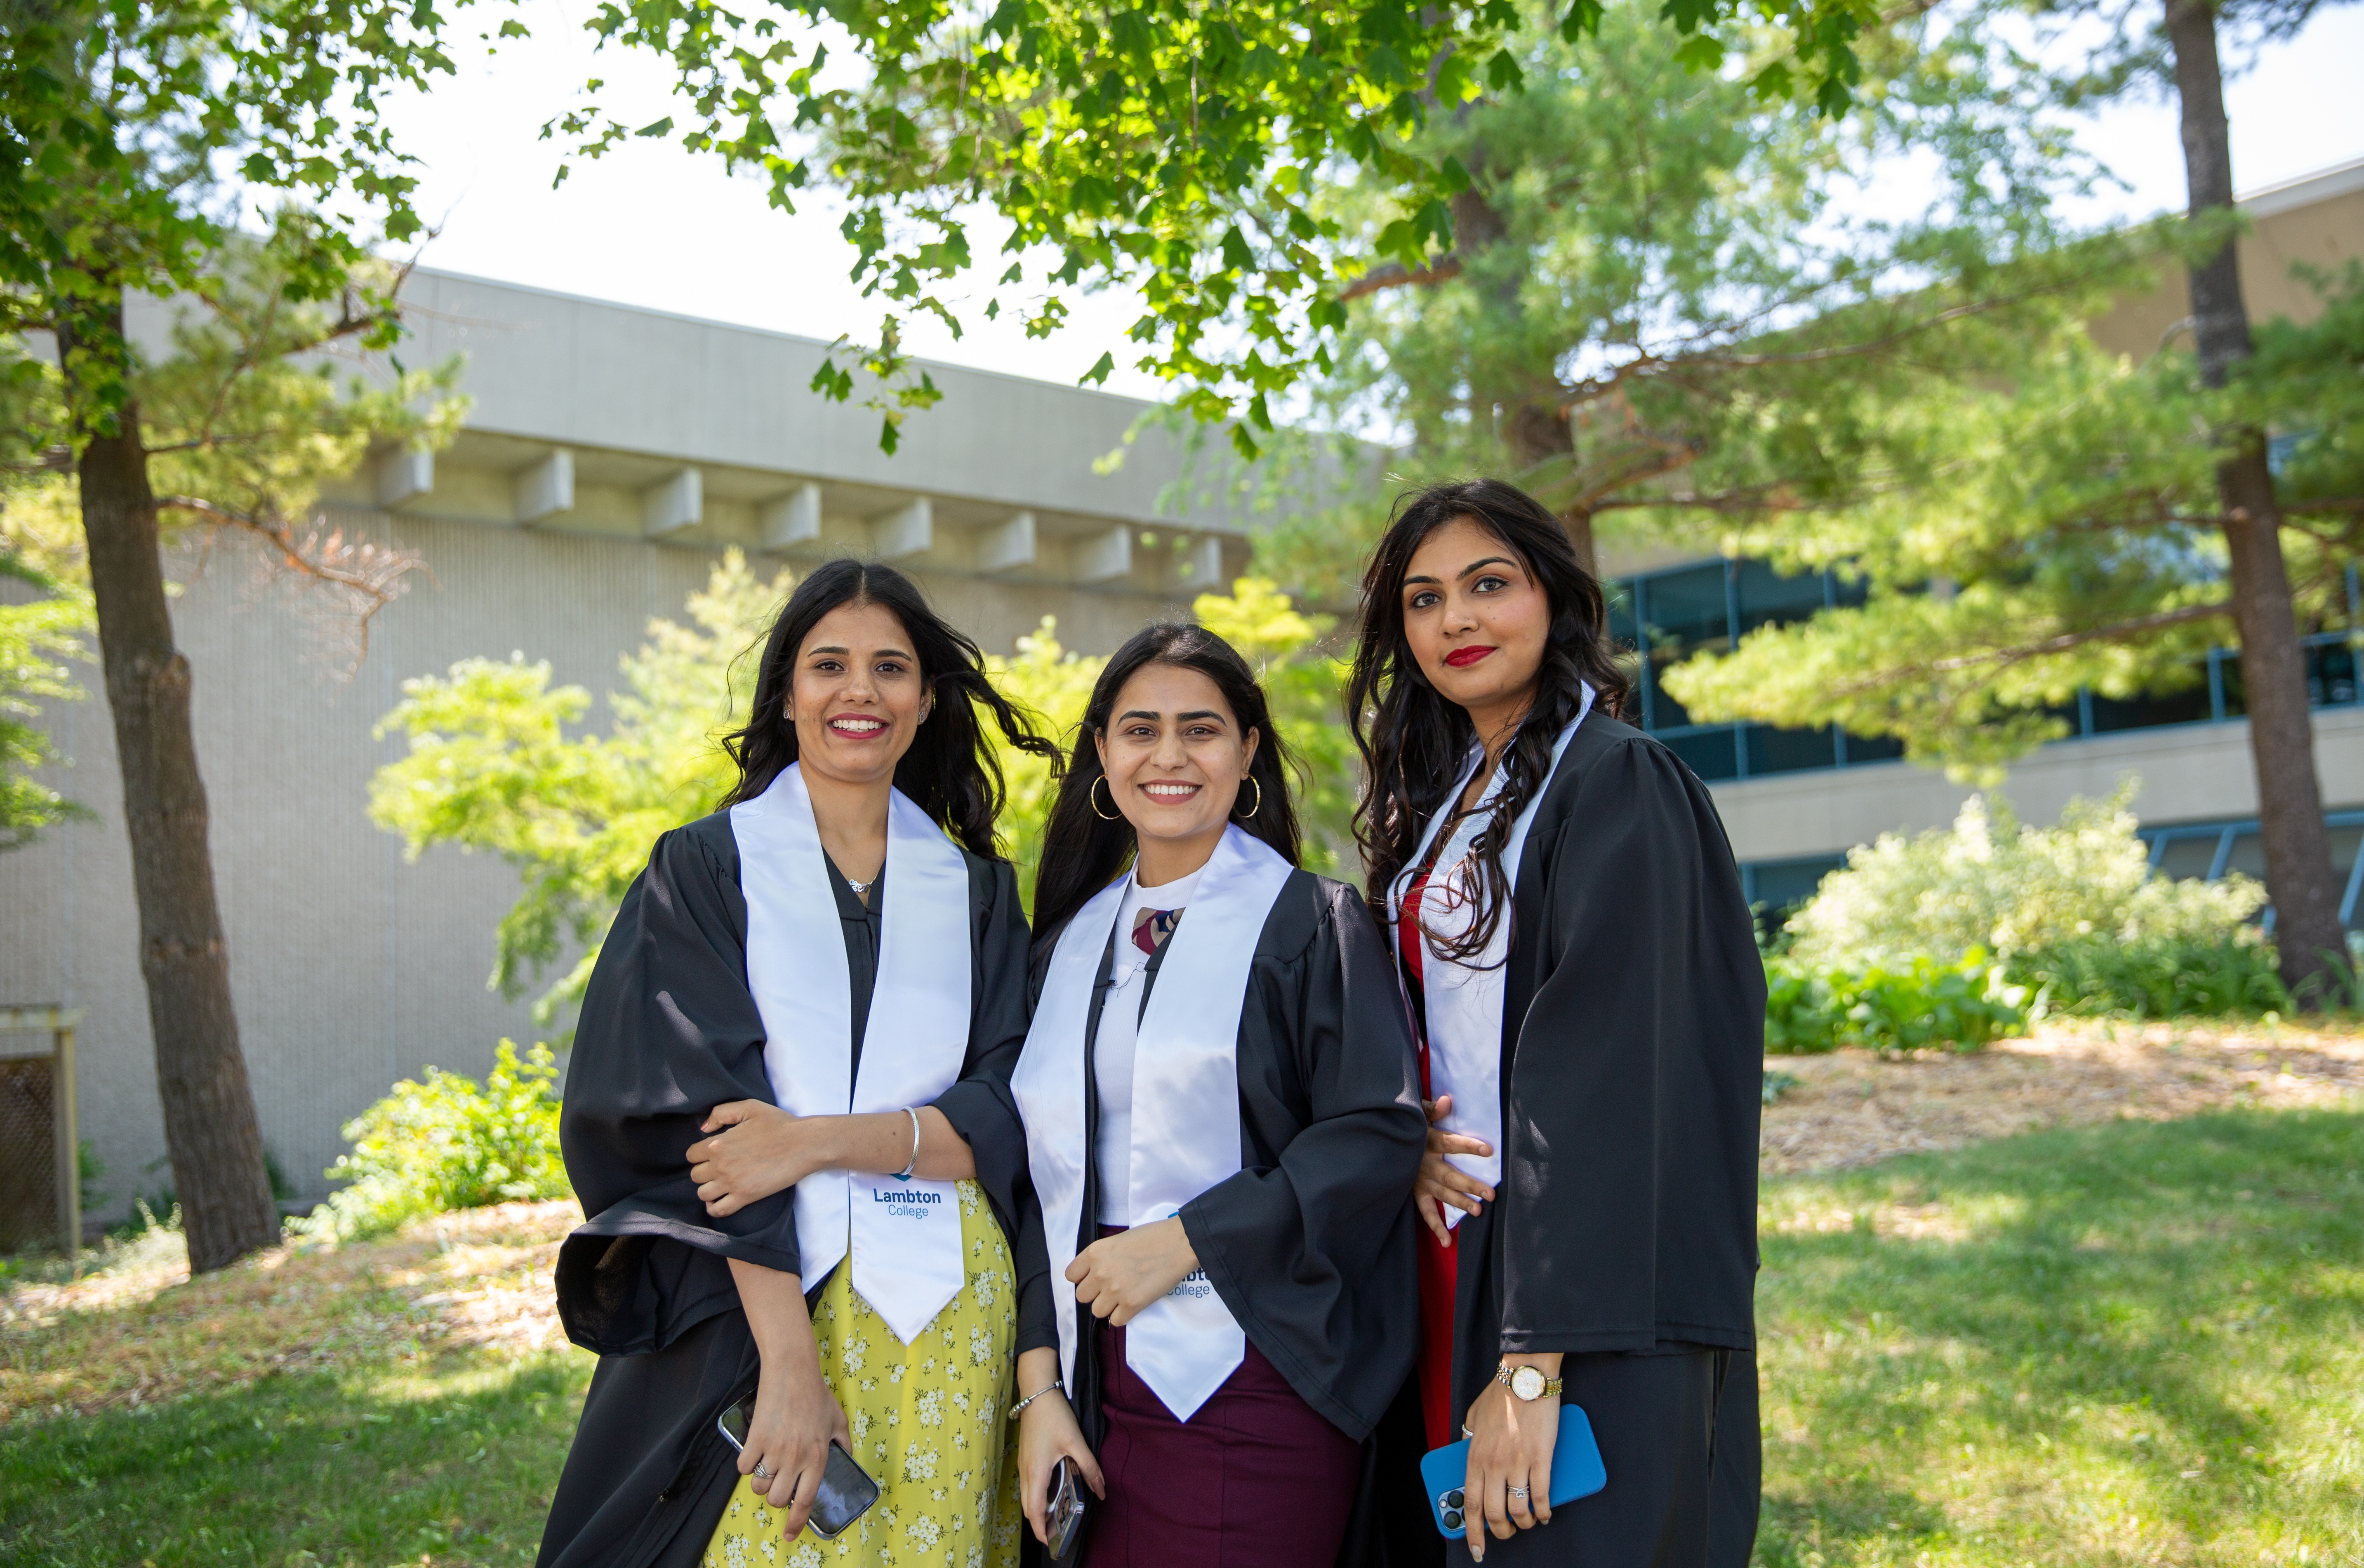 Three women international students posing for photo outside wearing convocation gowns.